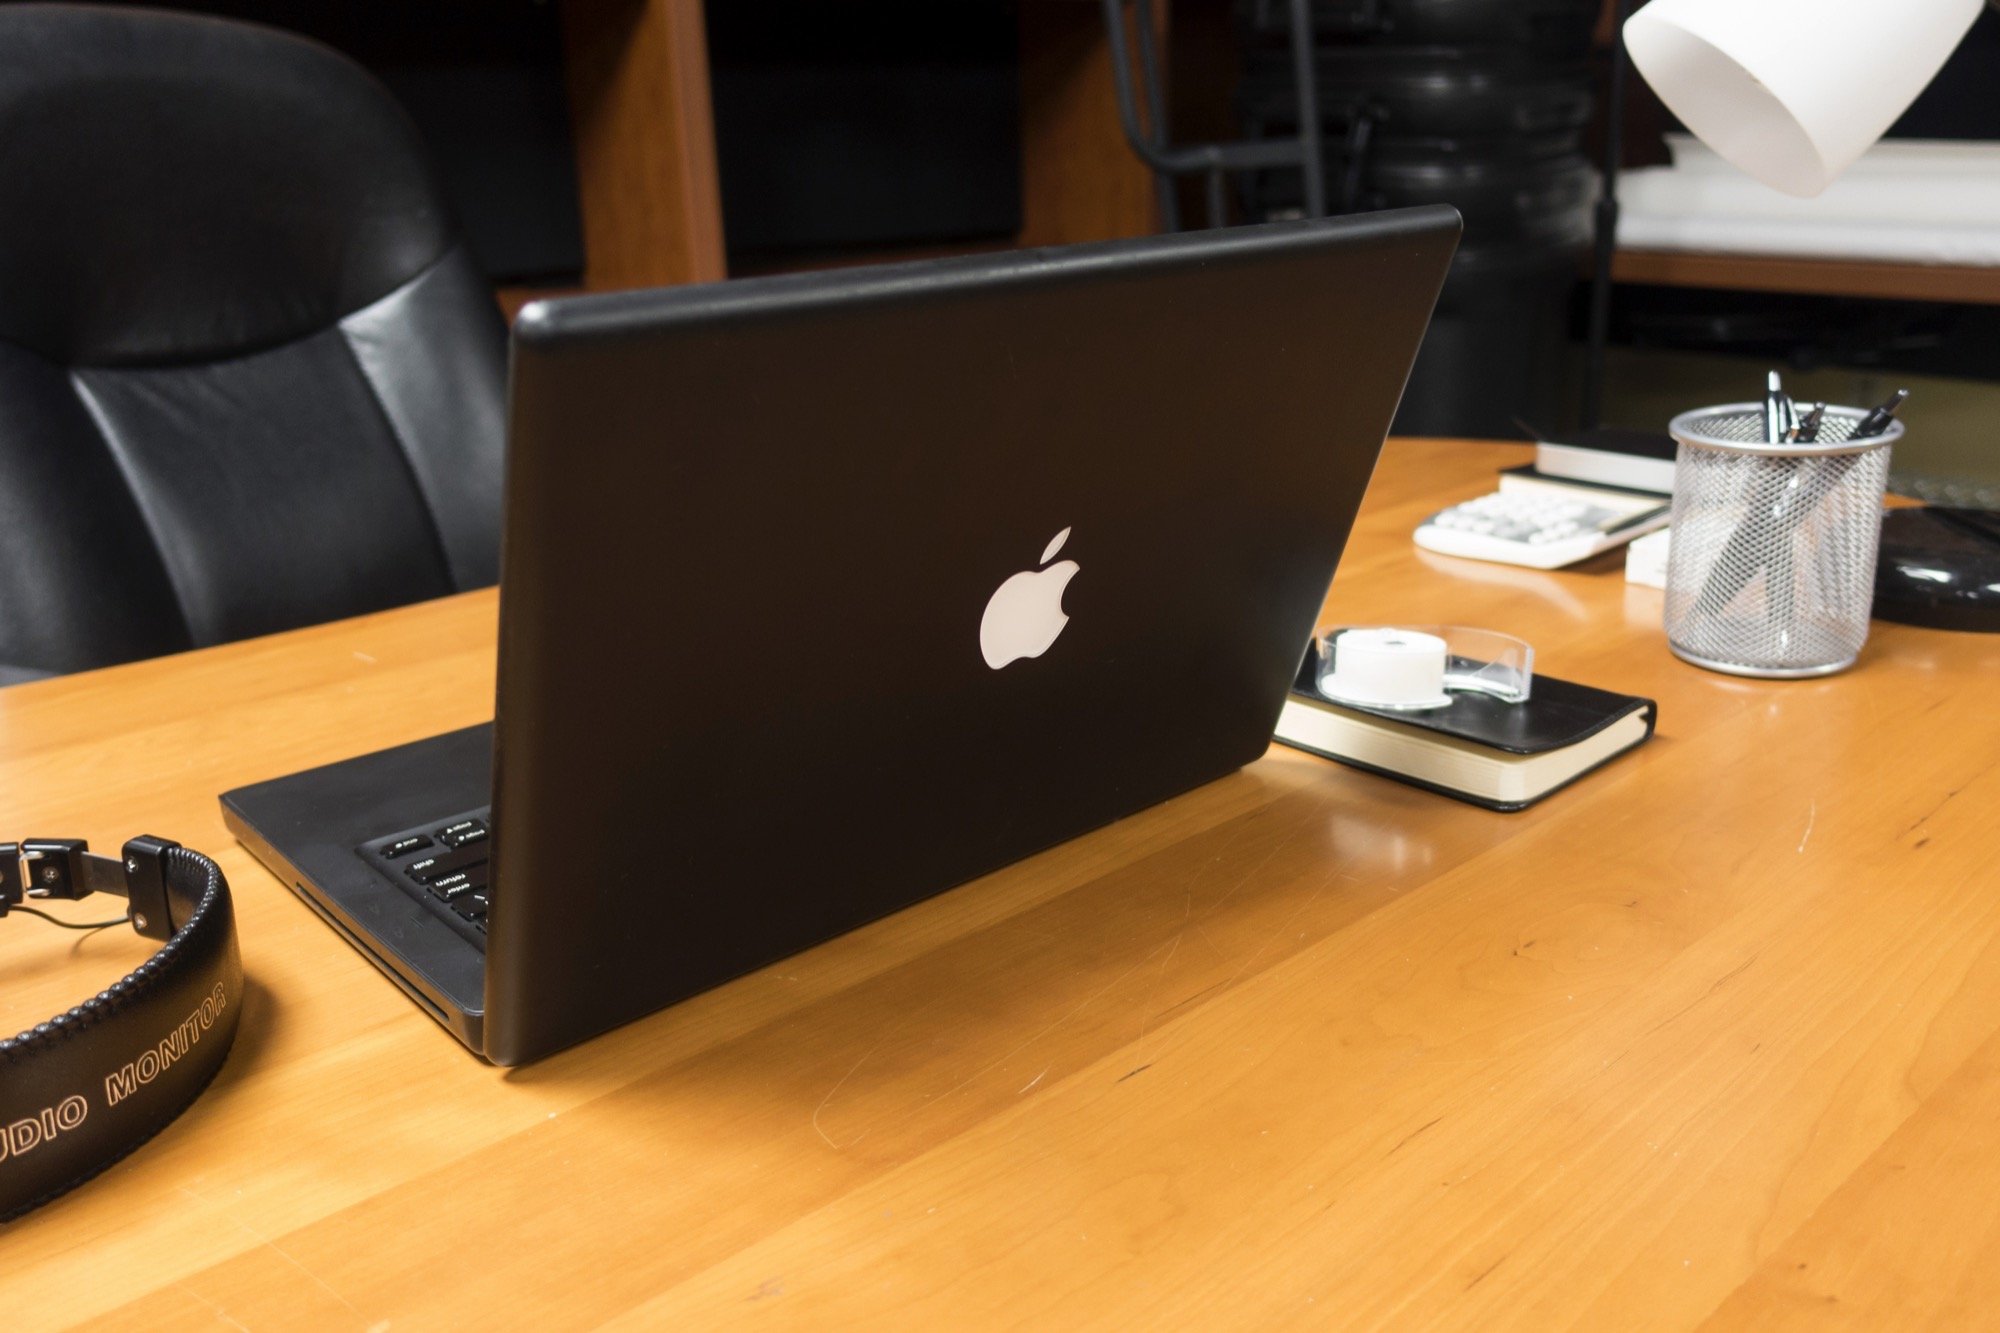 Back in Black: Remembering the high-end MacBook | iMore